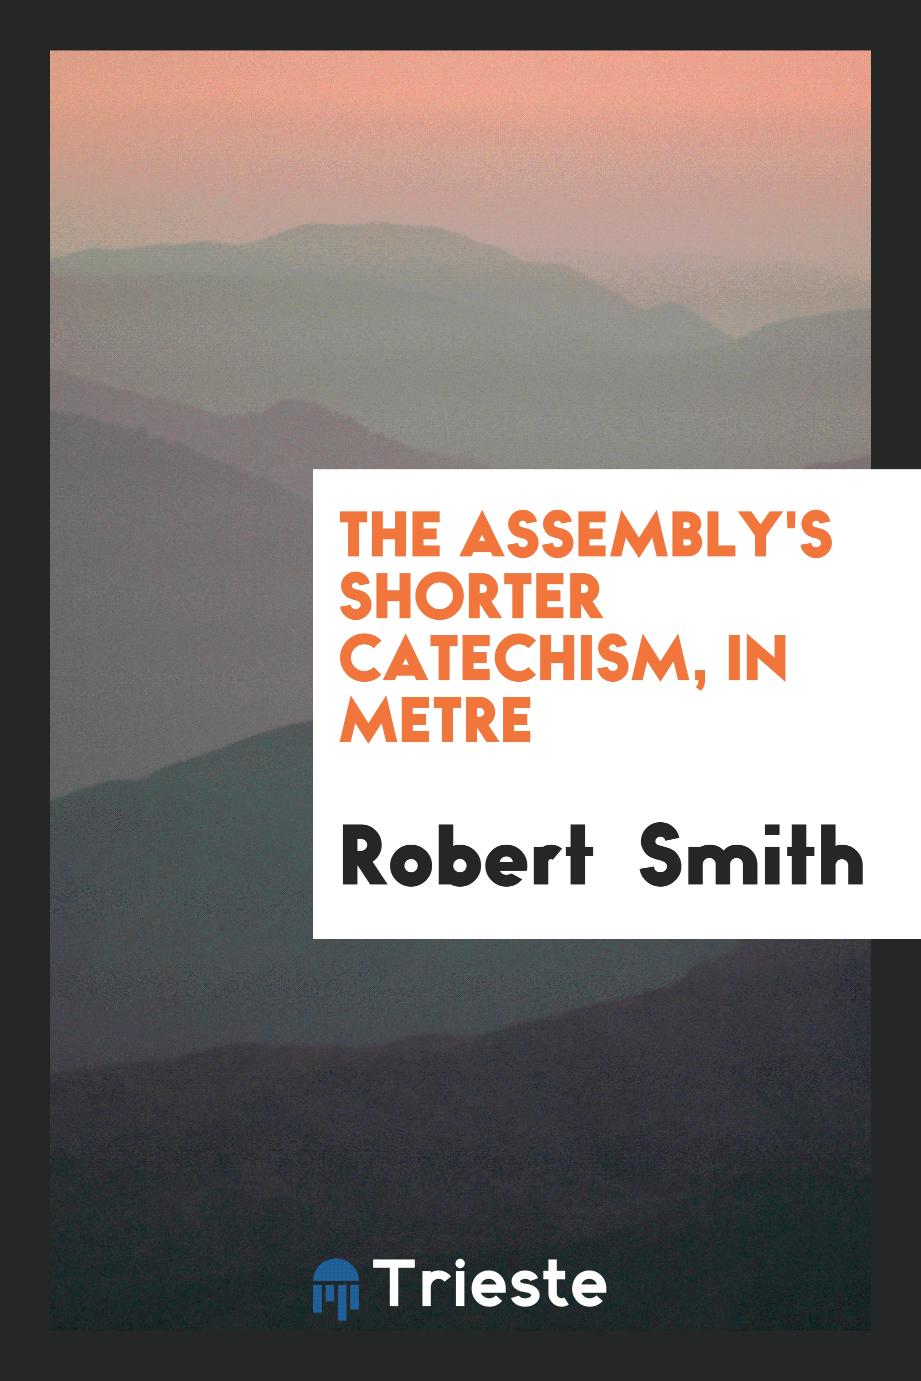 The Assembly's Shorter Catechism, in metre